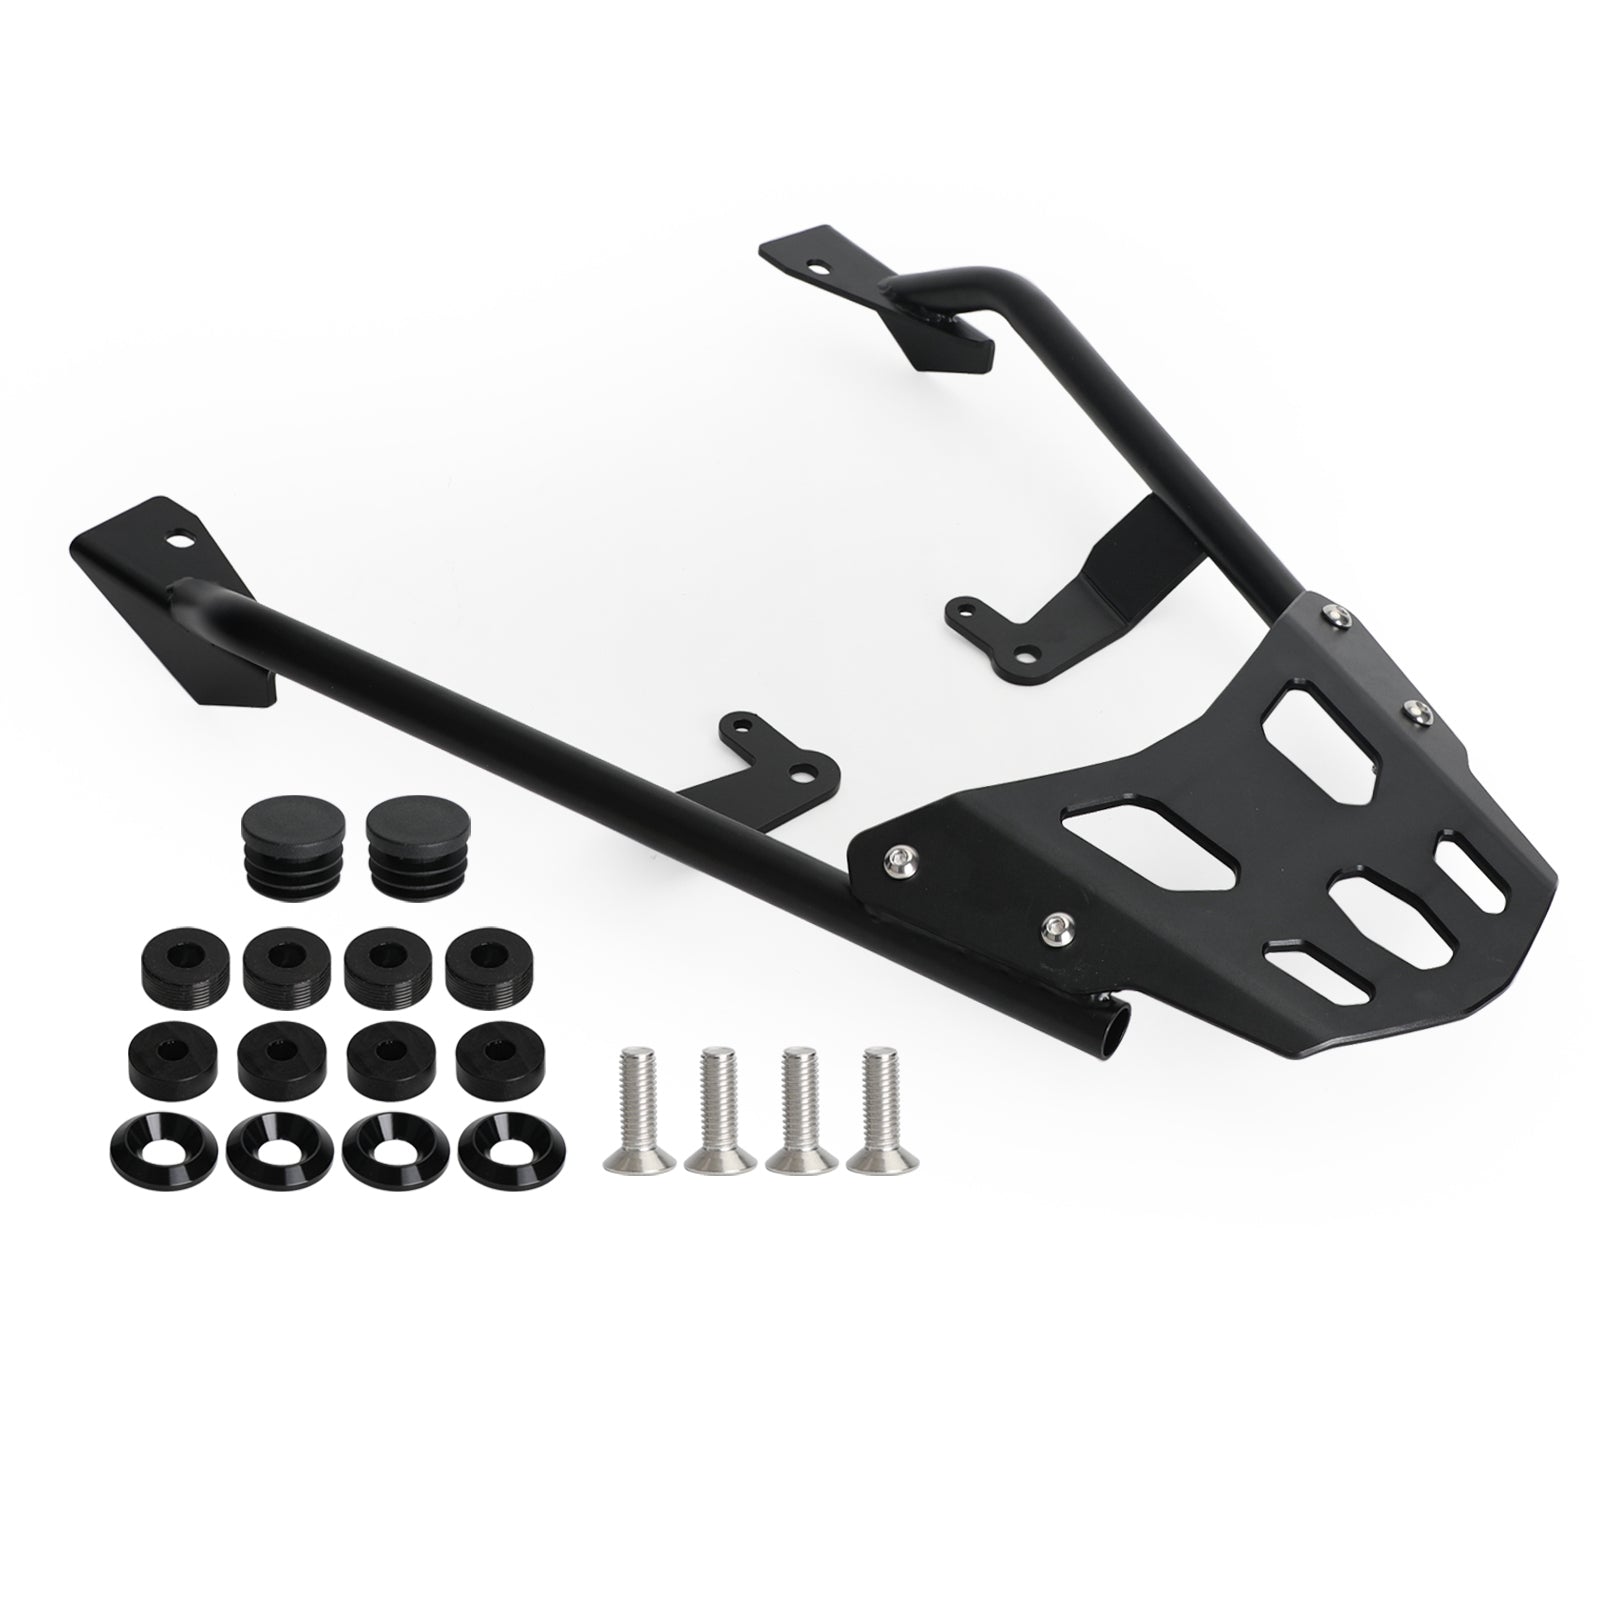 Rear Carrier Tail Luggage Rack Mount Fit for Honda X-ADV 750 XADV 750 2021 Generic